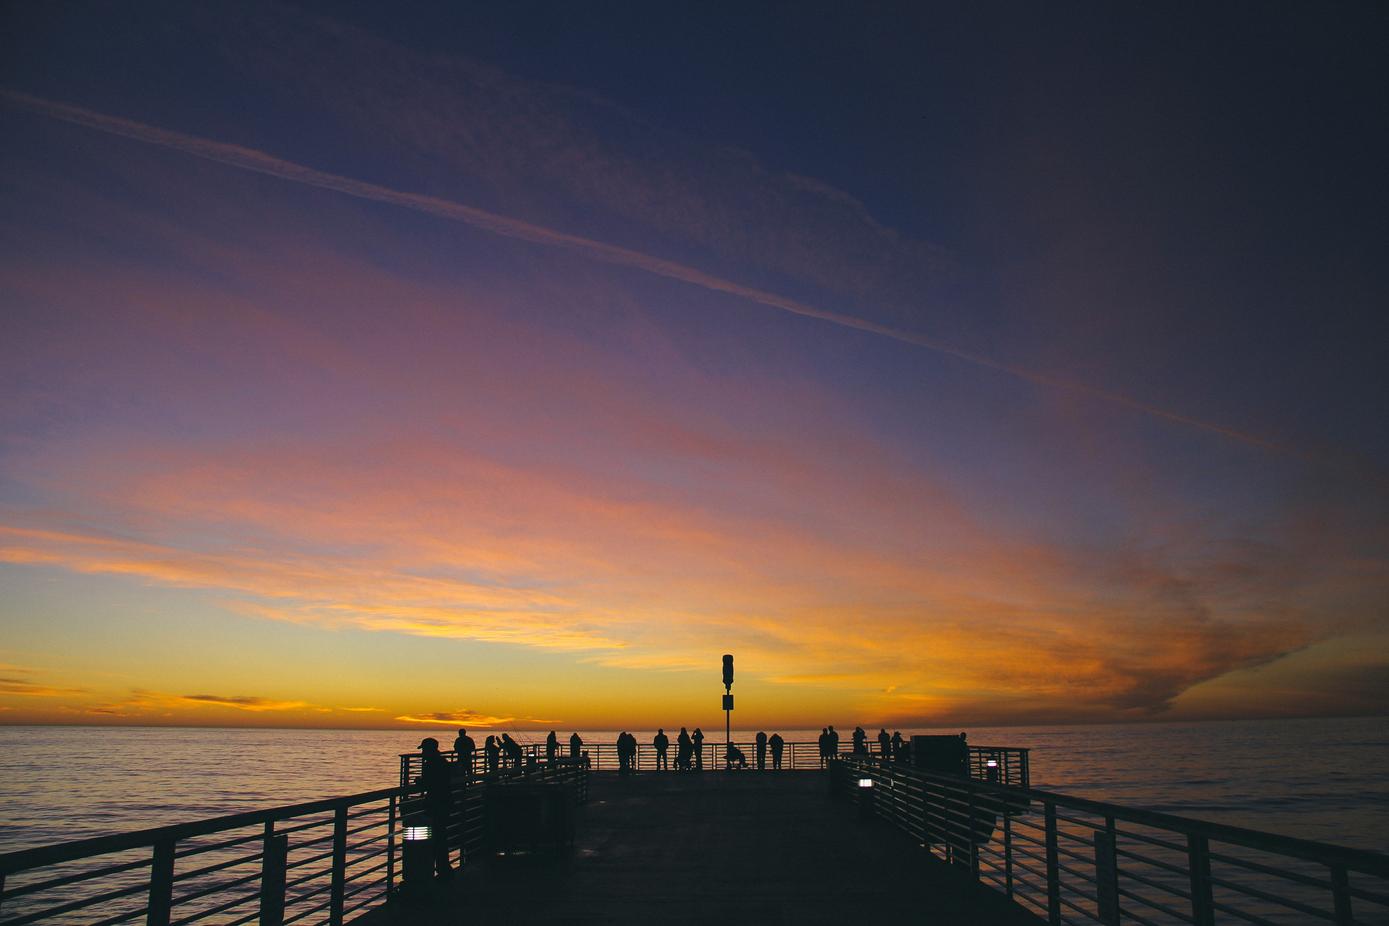 Group of people on a pier at sunset.